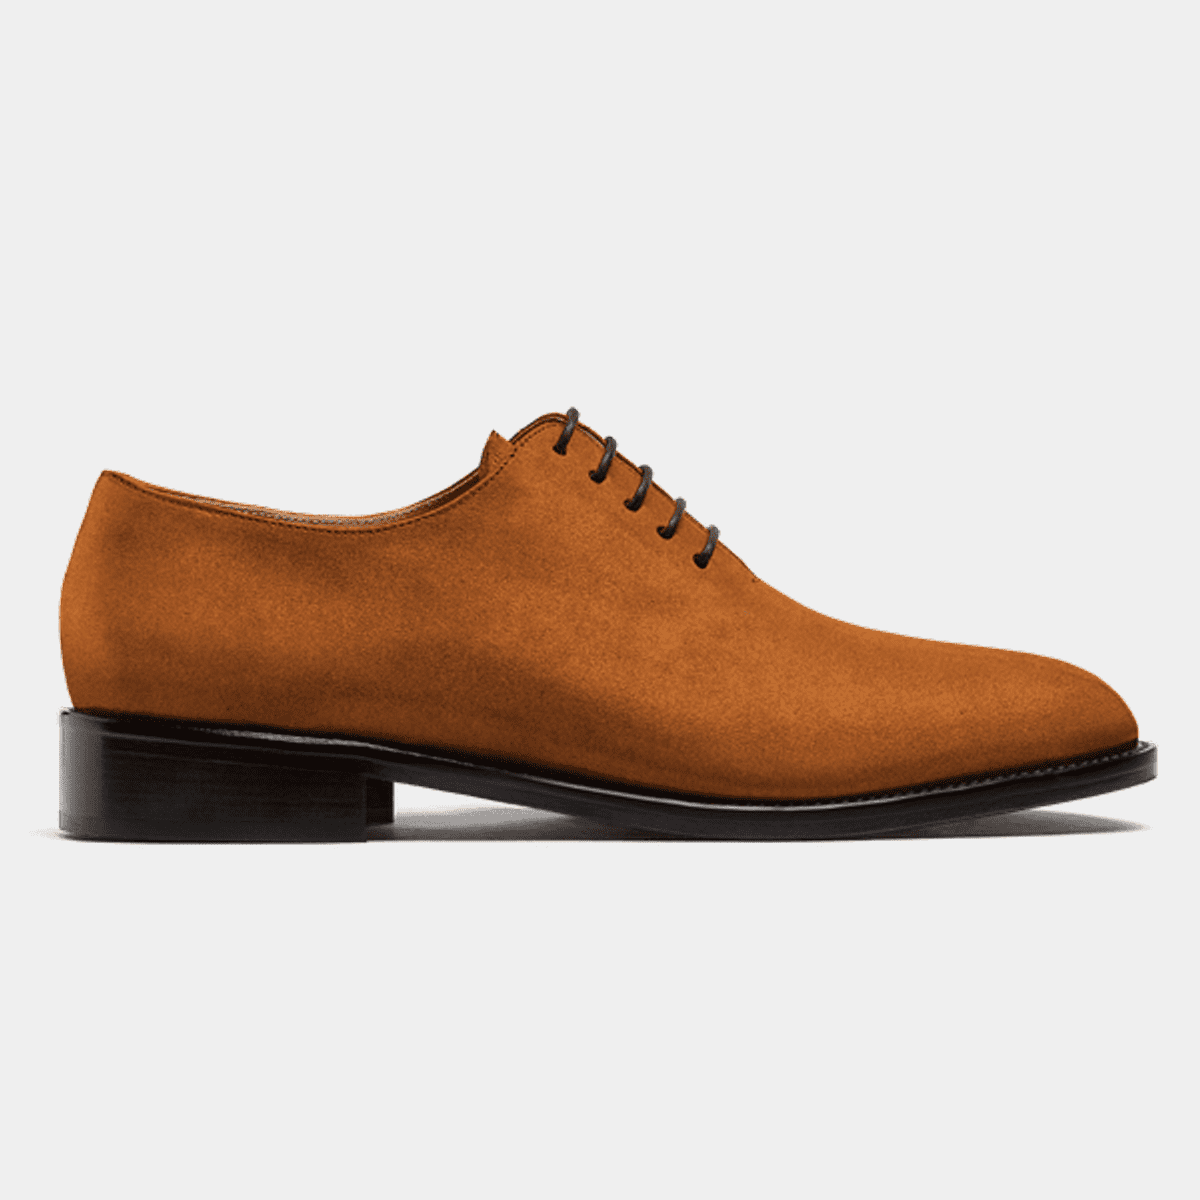 Wholecut Oxford shoes - brown suede